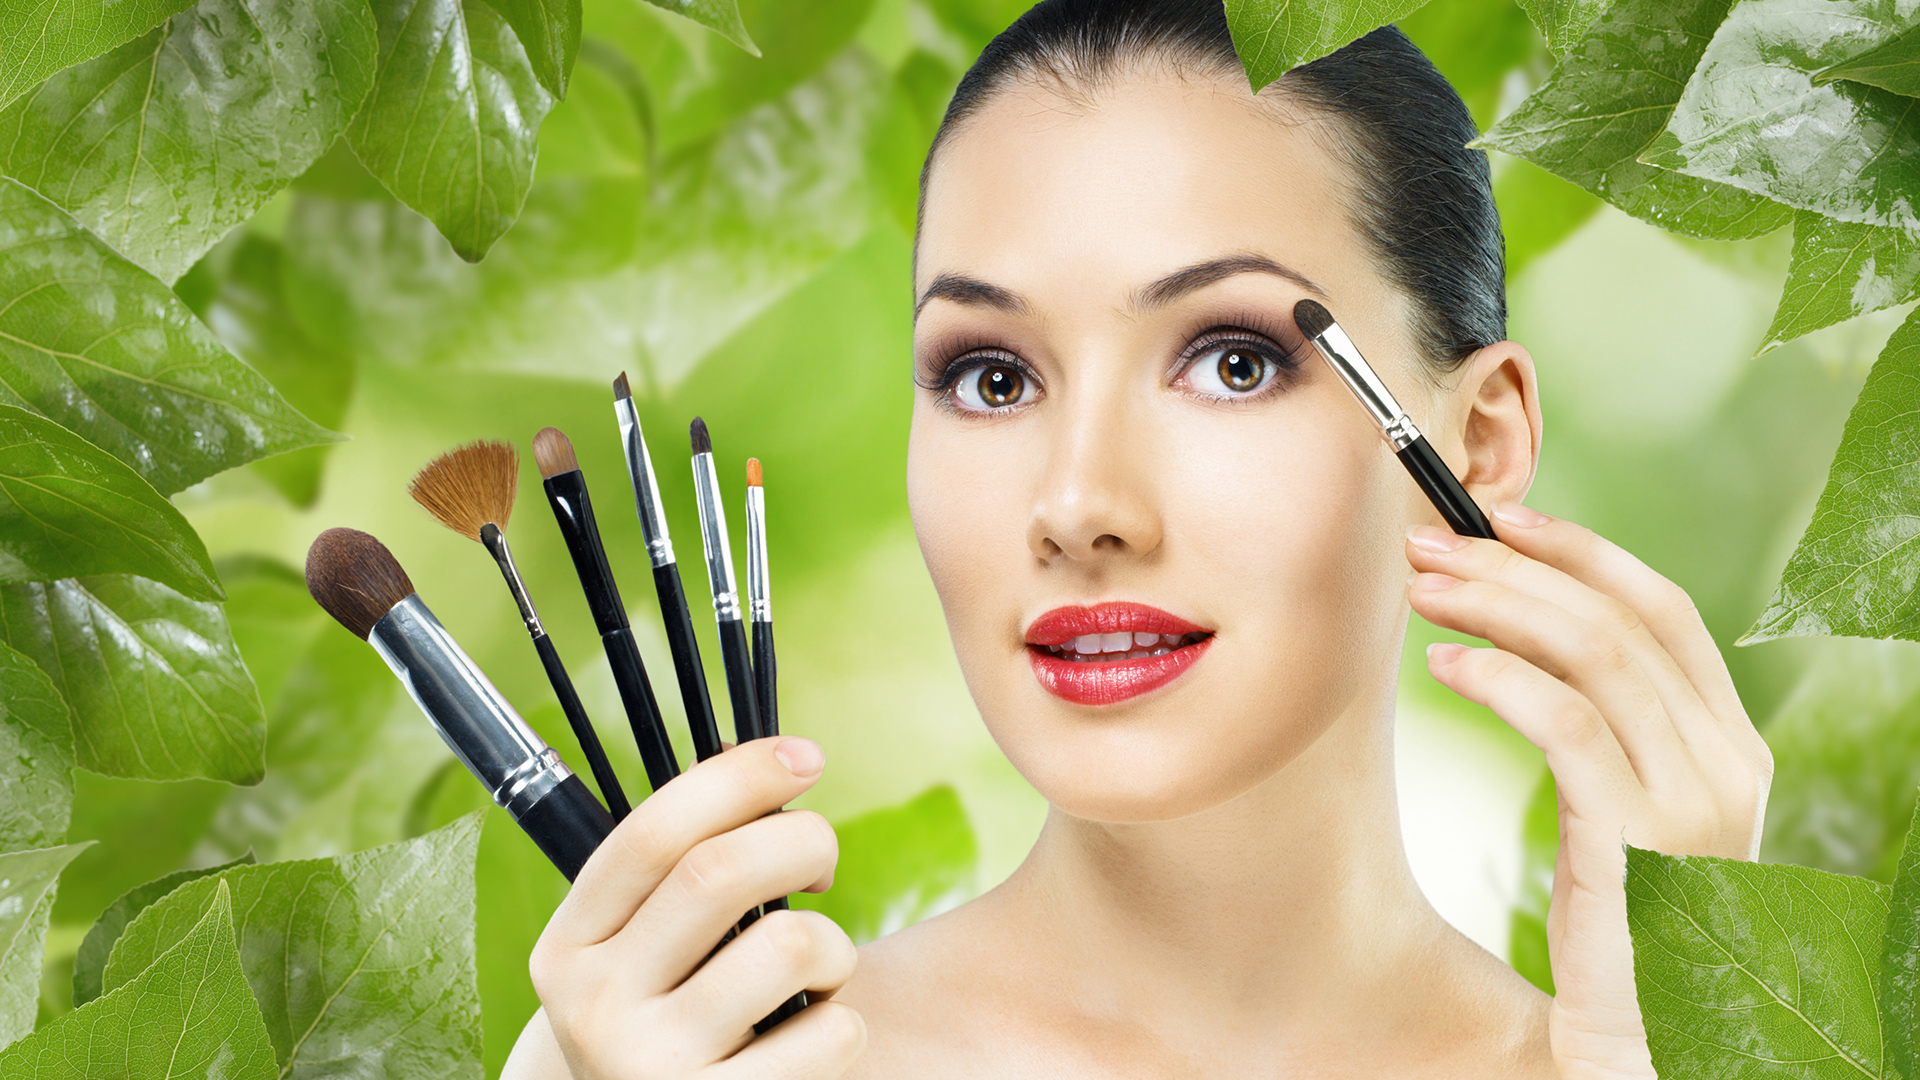 7 Beauty Tips For Girls To Enhance Your Natural Beauty